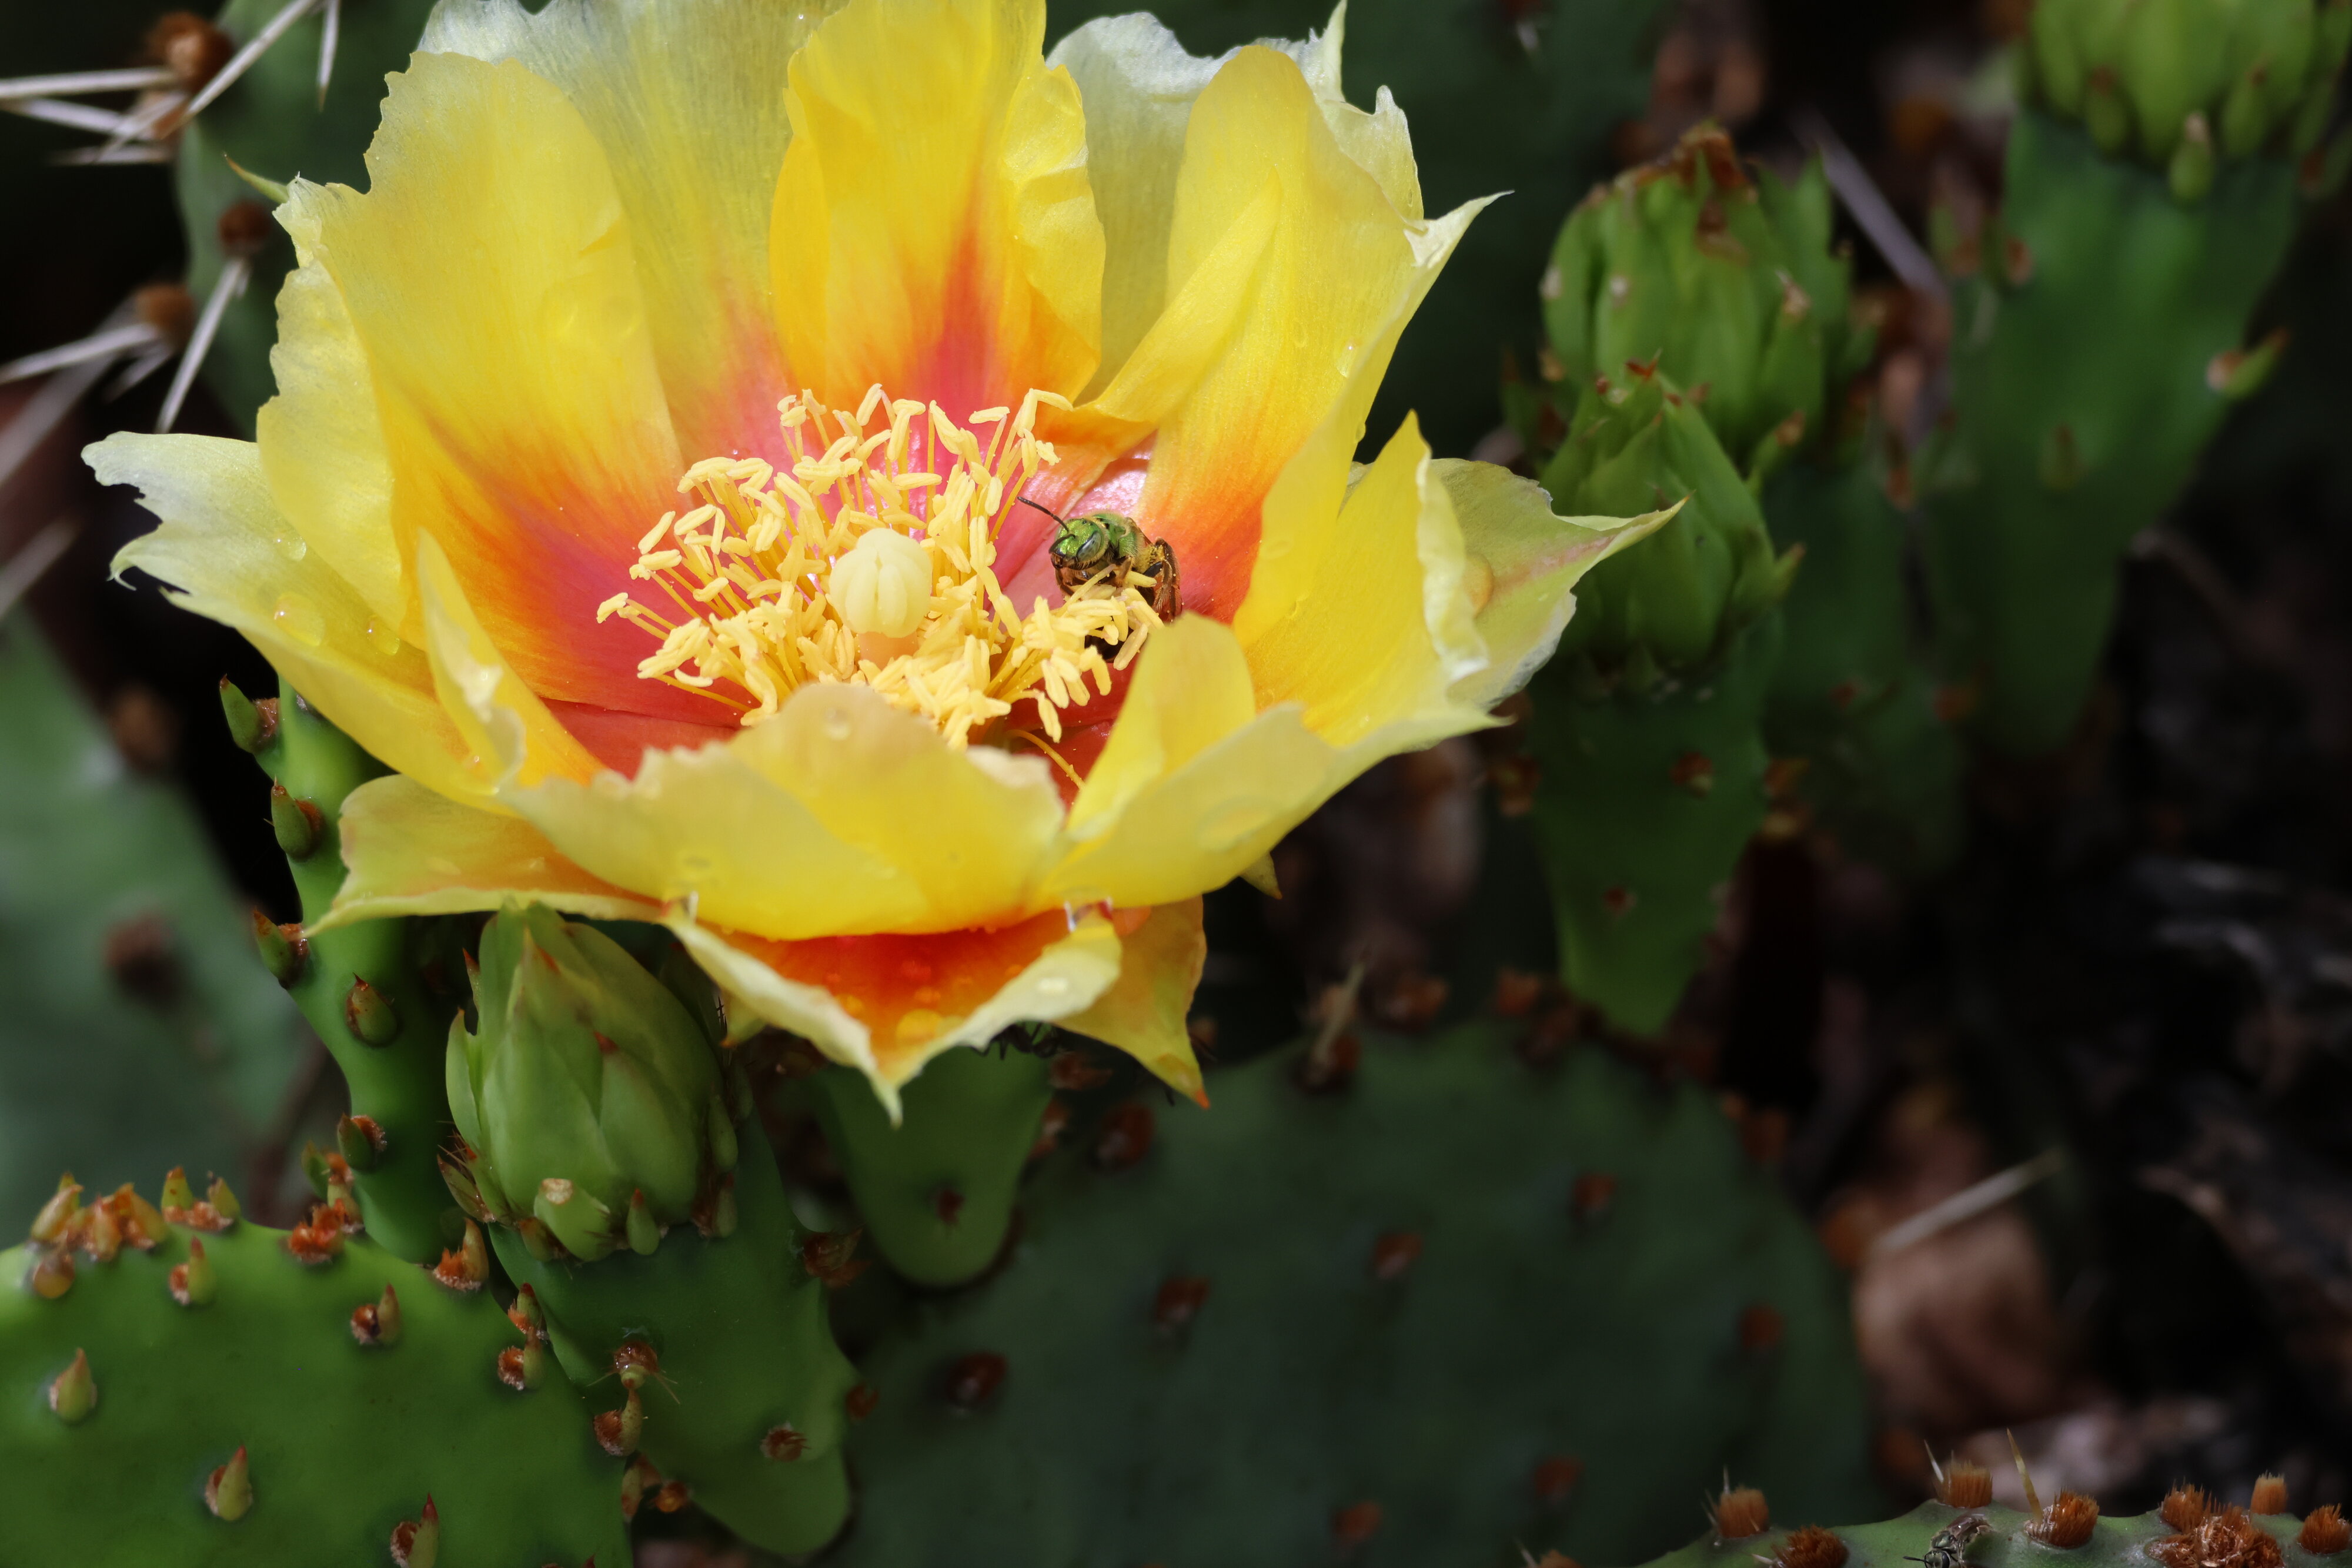 Insects on cactus flowers